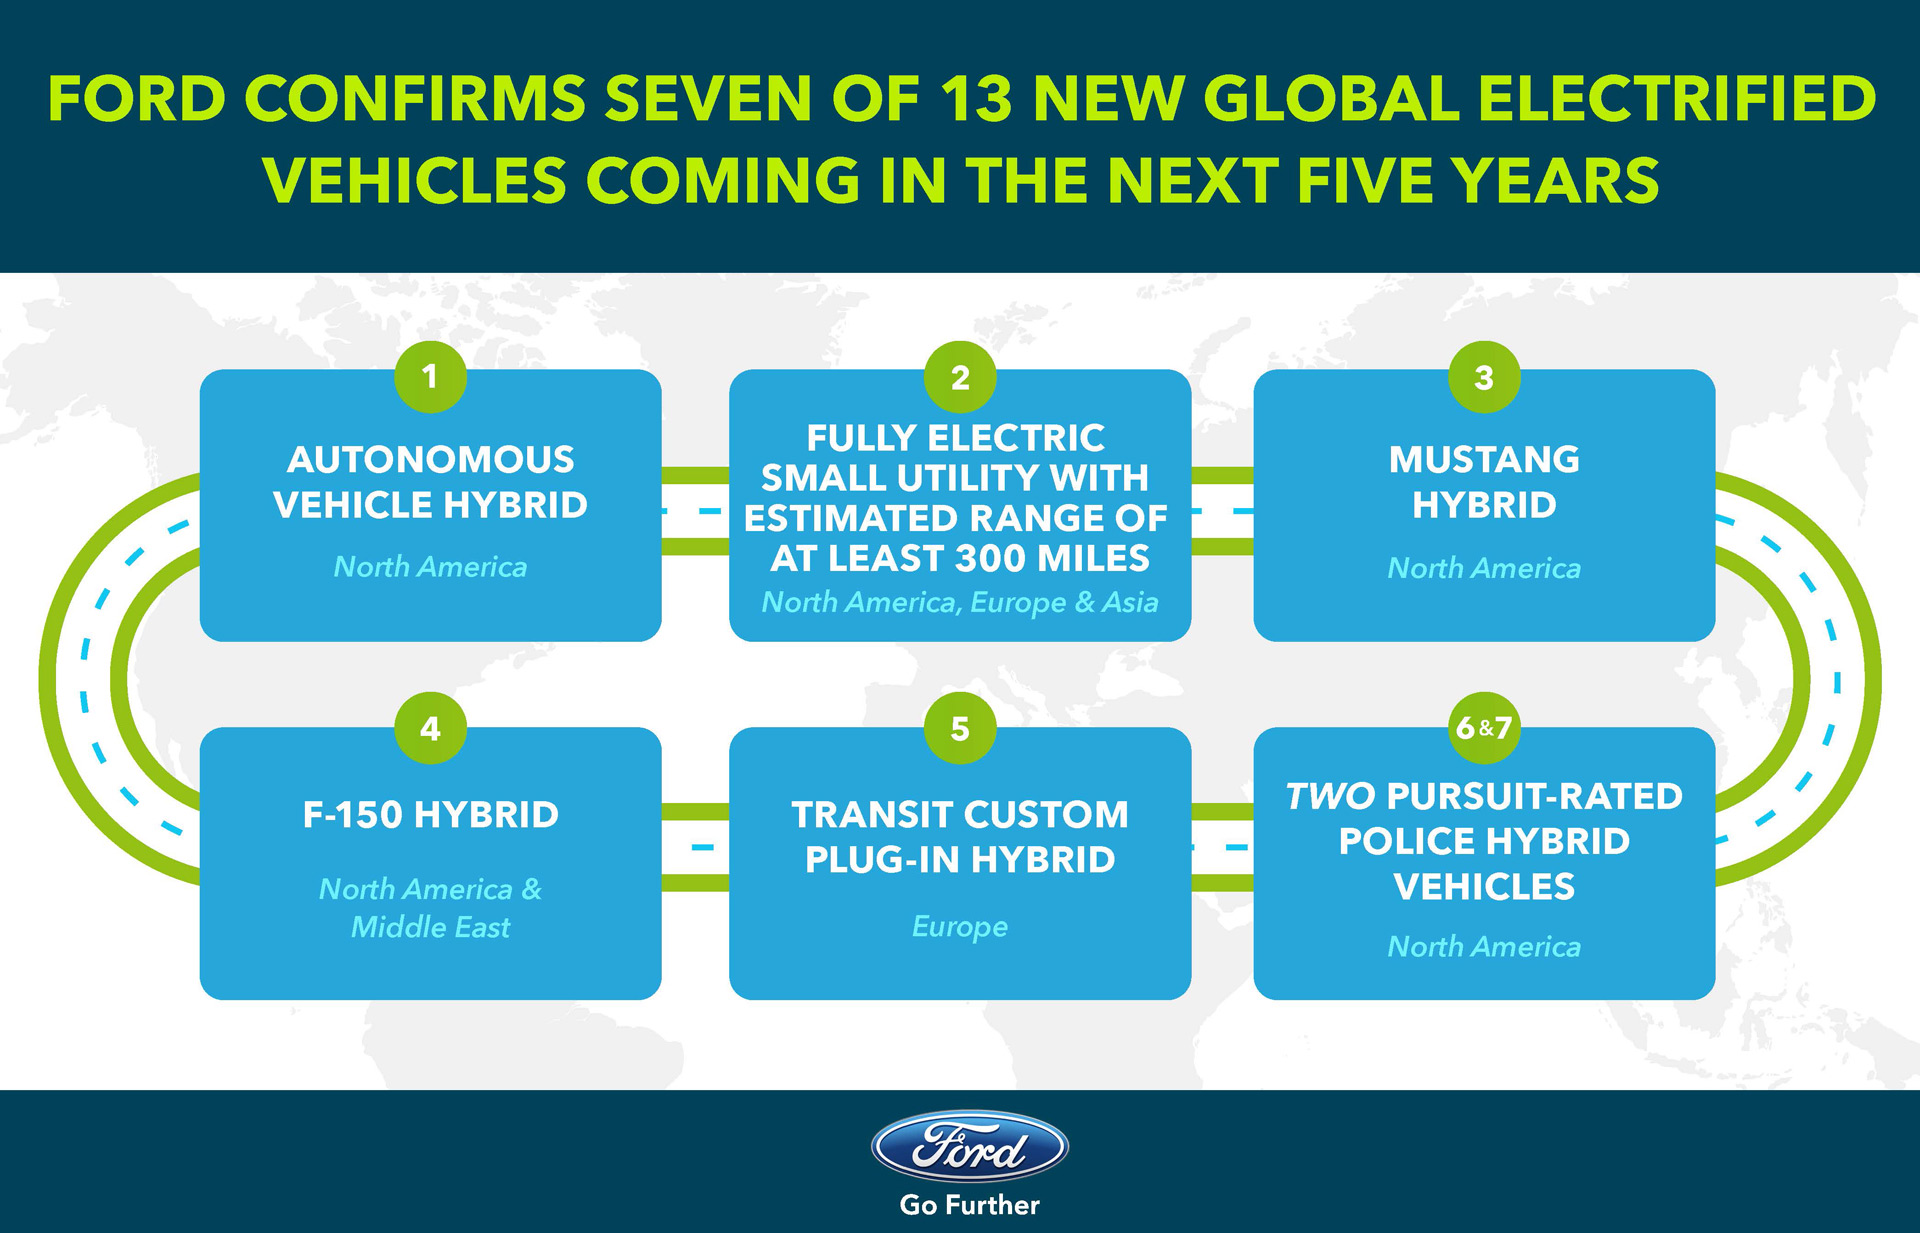 Ford details 7 of 13 electrified cars due by 2020 ...